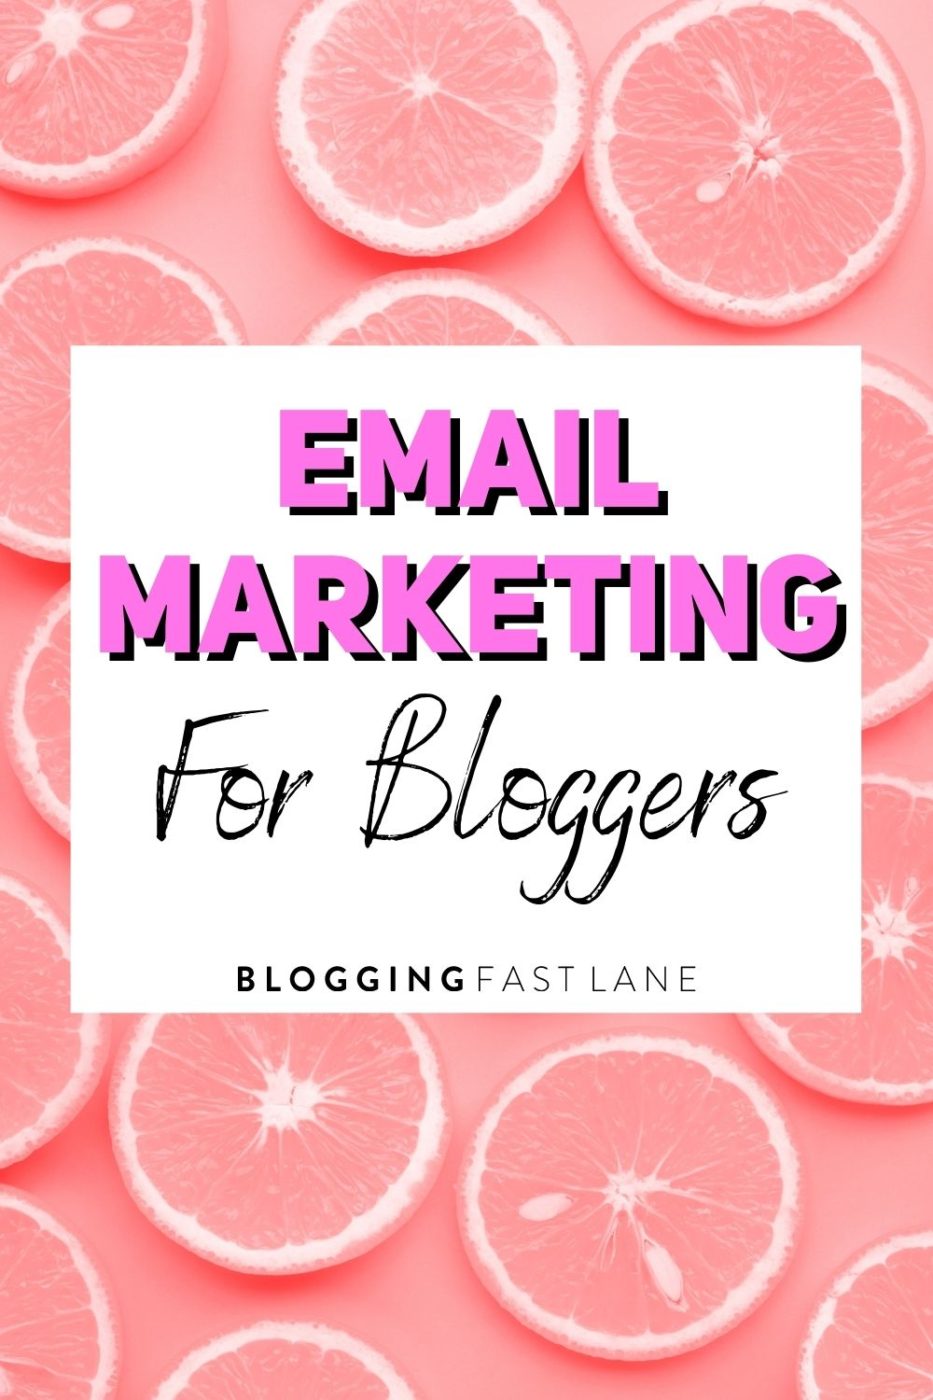 Email Marketing for Bloggers | Email marketing is one of the best ways to connect with your audience, drive traffic to your blog and boost your income. Click here to learn everything you need to know about email marketing for bloggers today! #blogging #emailmarketing #passiveincome